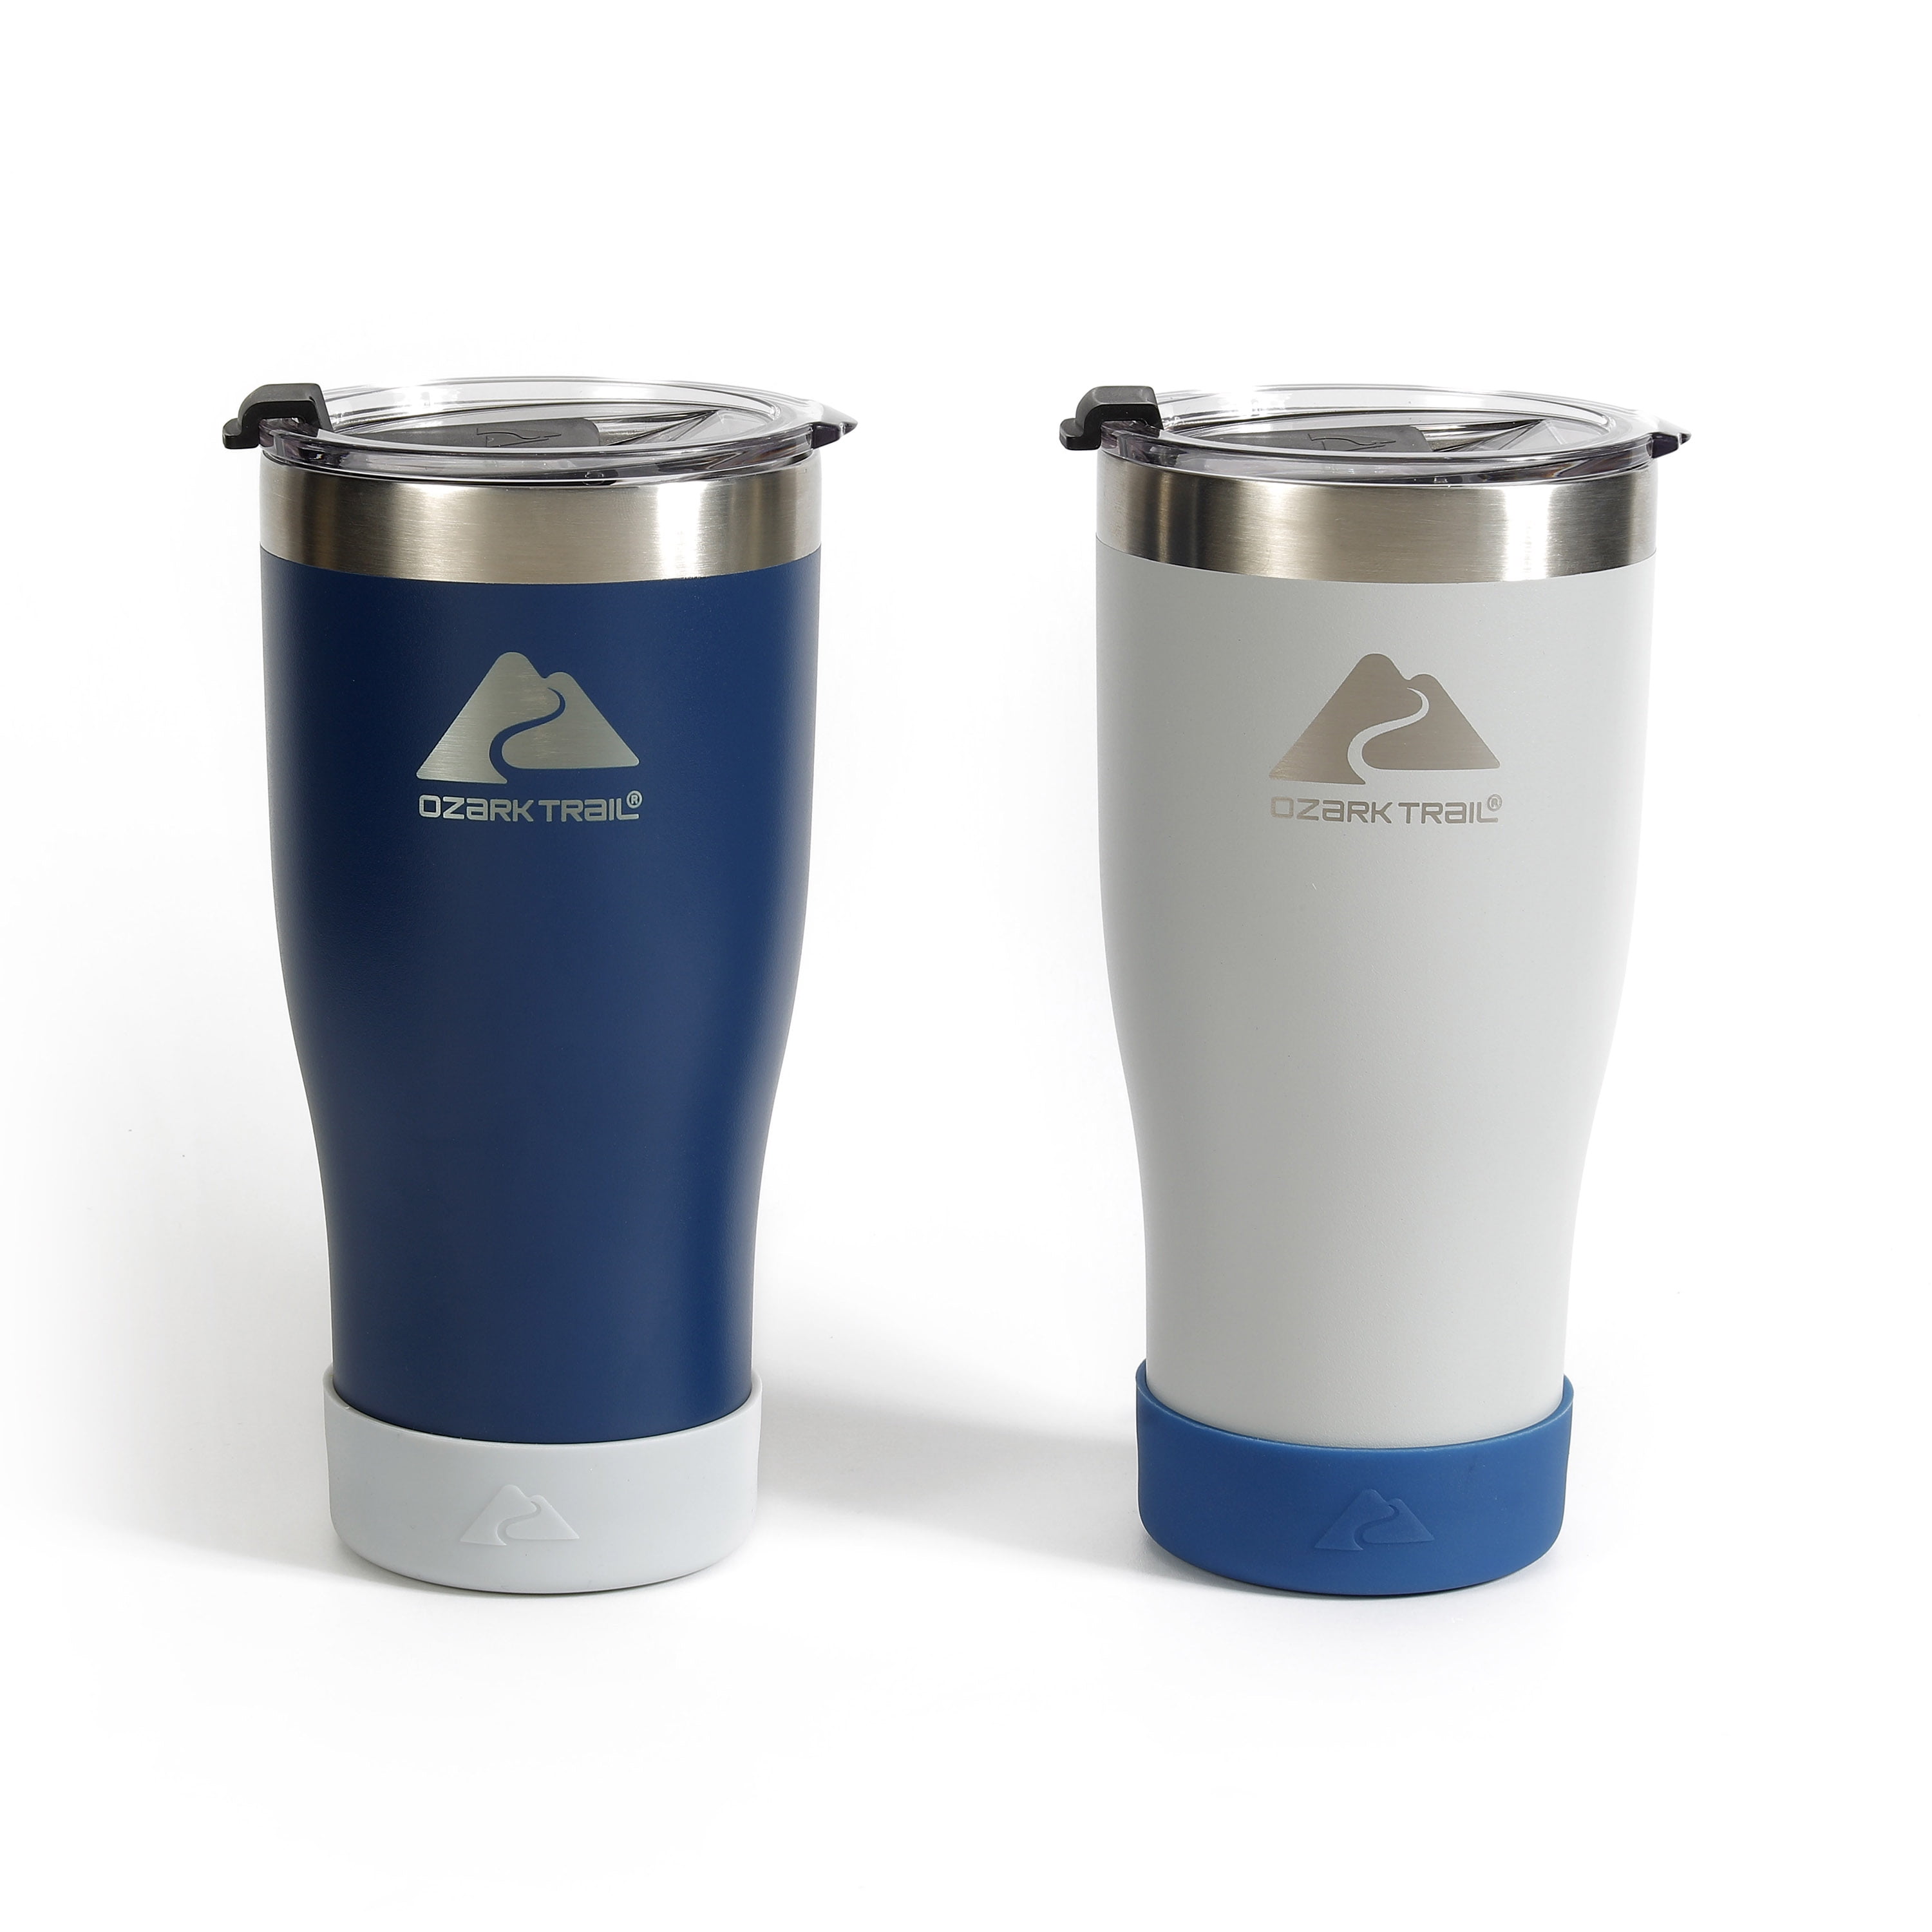 BRAND NEW Ozark Trail 20 oz Vacuum insulated Stainless steel tumbler with lid. 